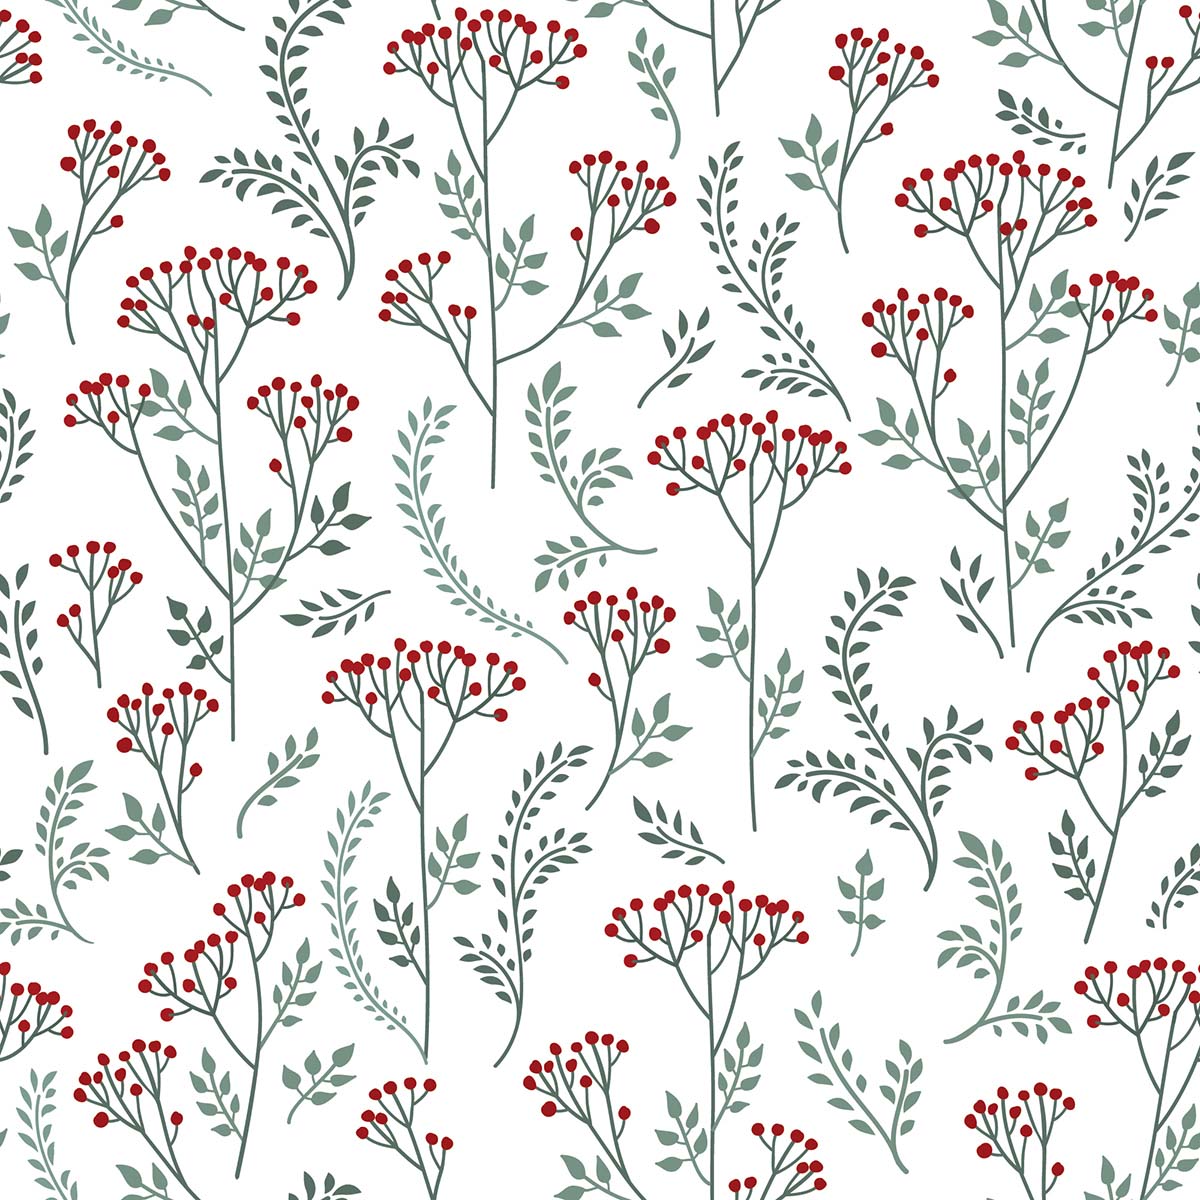 A pattern of red flowers and green leaves